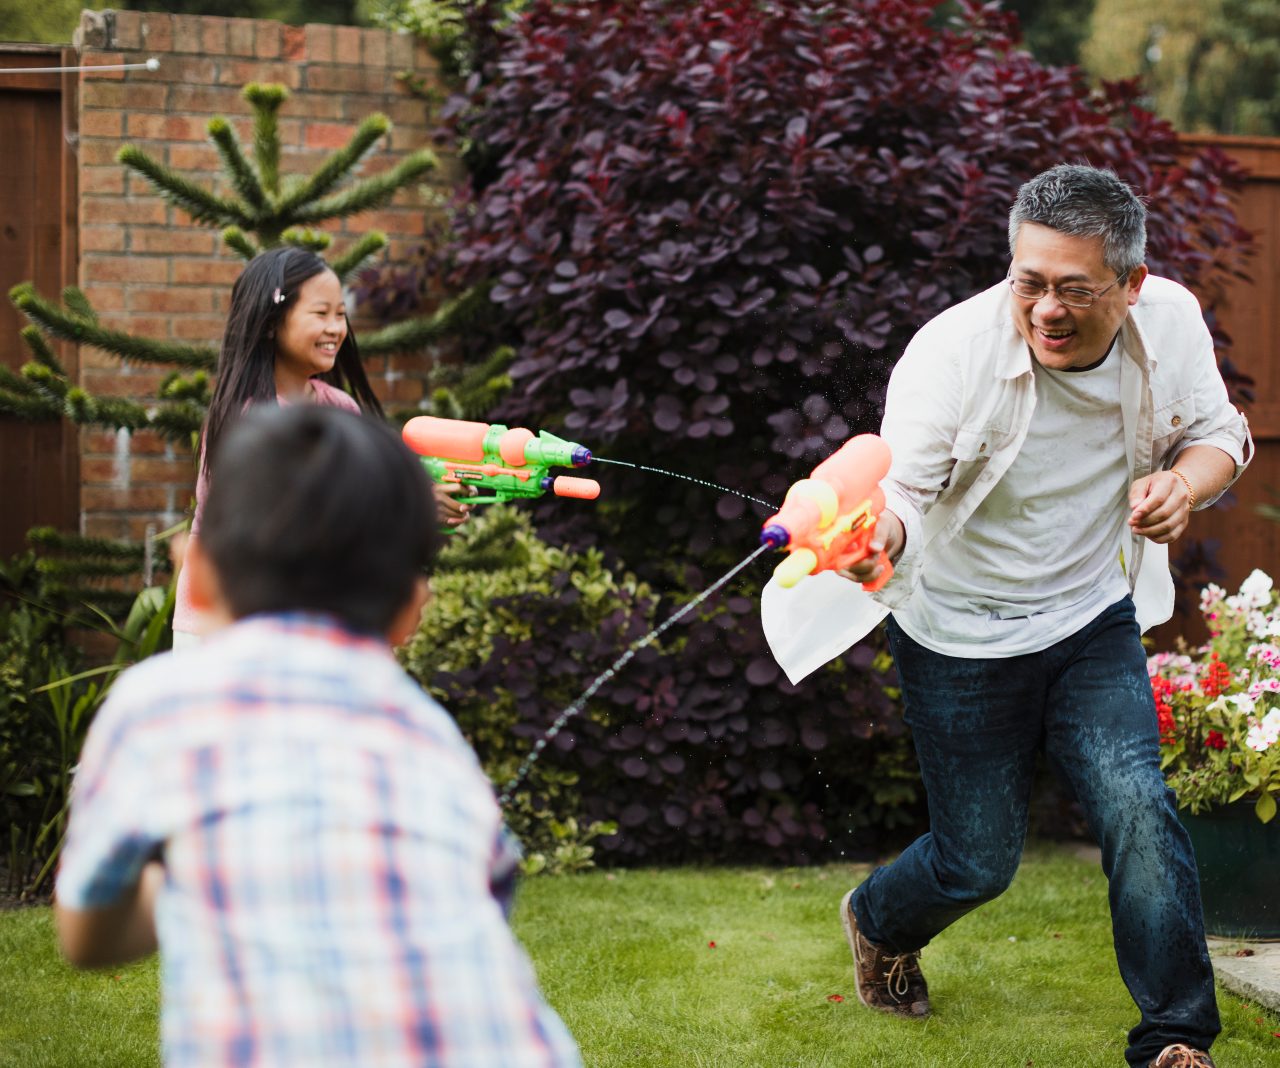 Family are having a water fight together with water pistols in the garden. The little girl is aiming for her dad, who is aiming for the little boy.